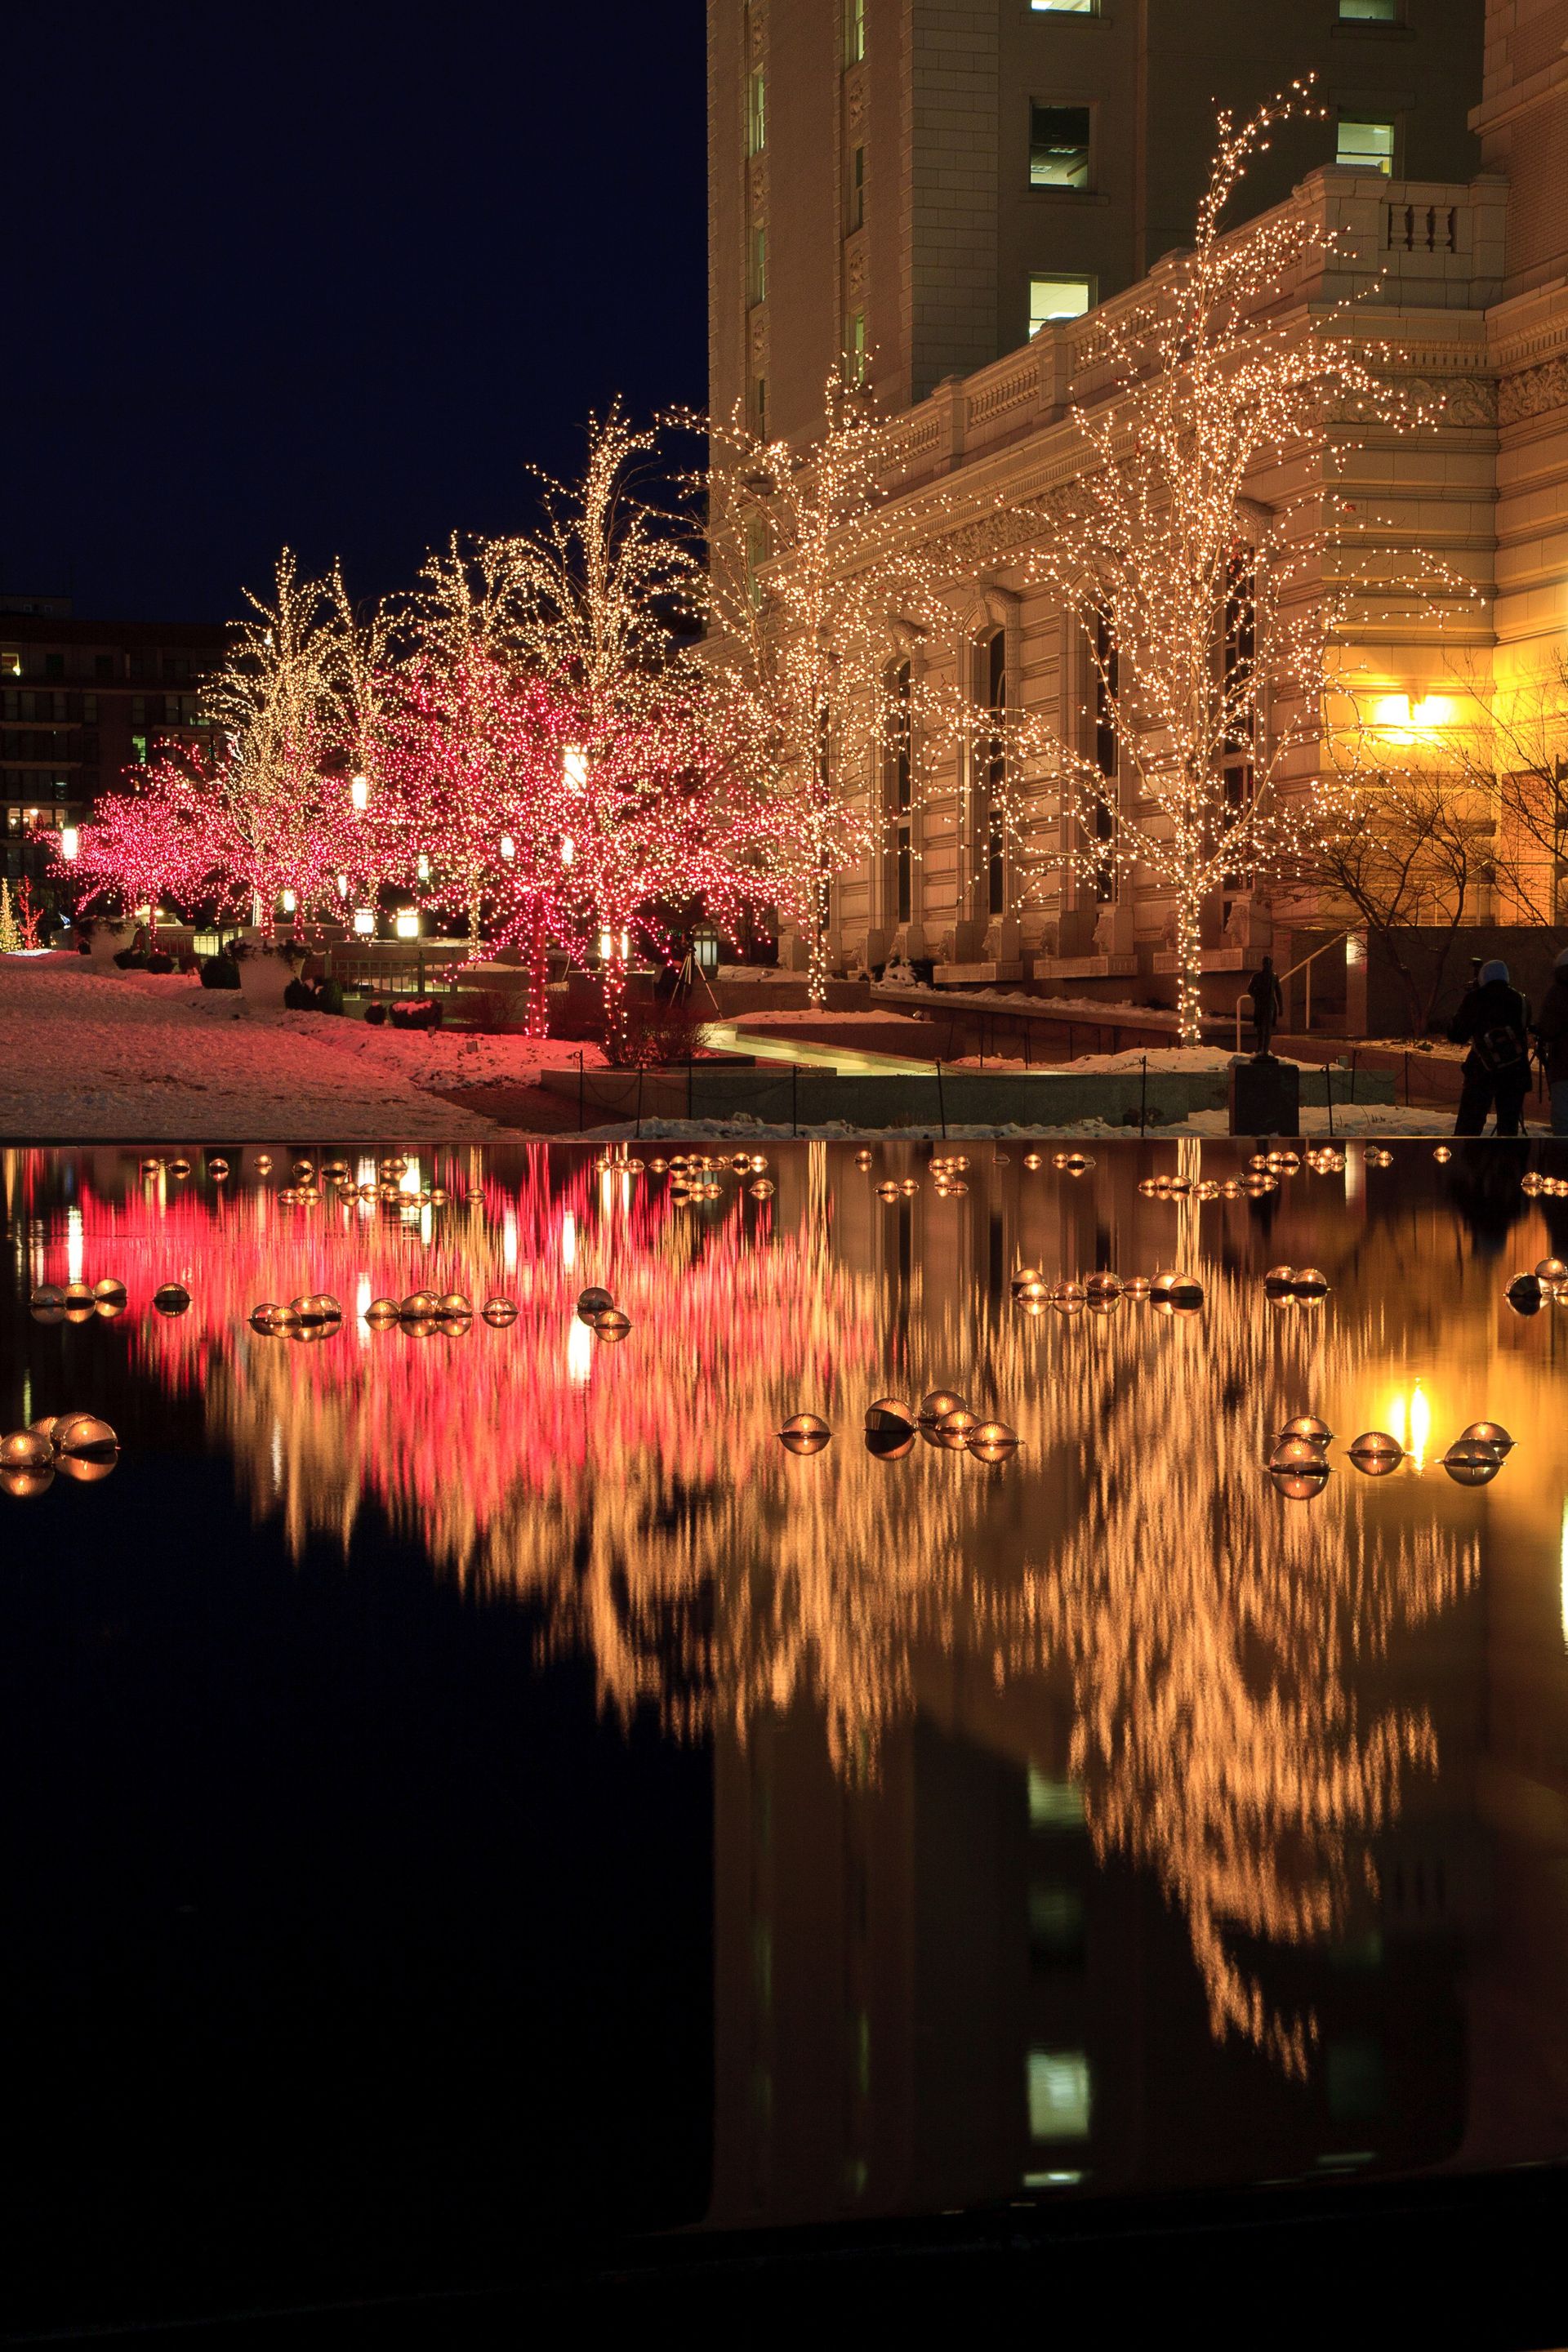 Christmas tree lights reflected in a pool of water at Temple Square.